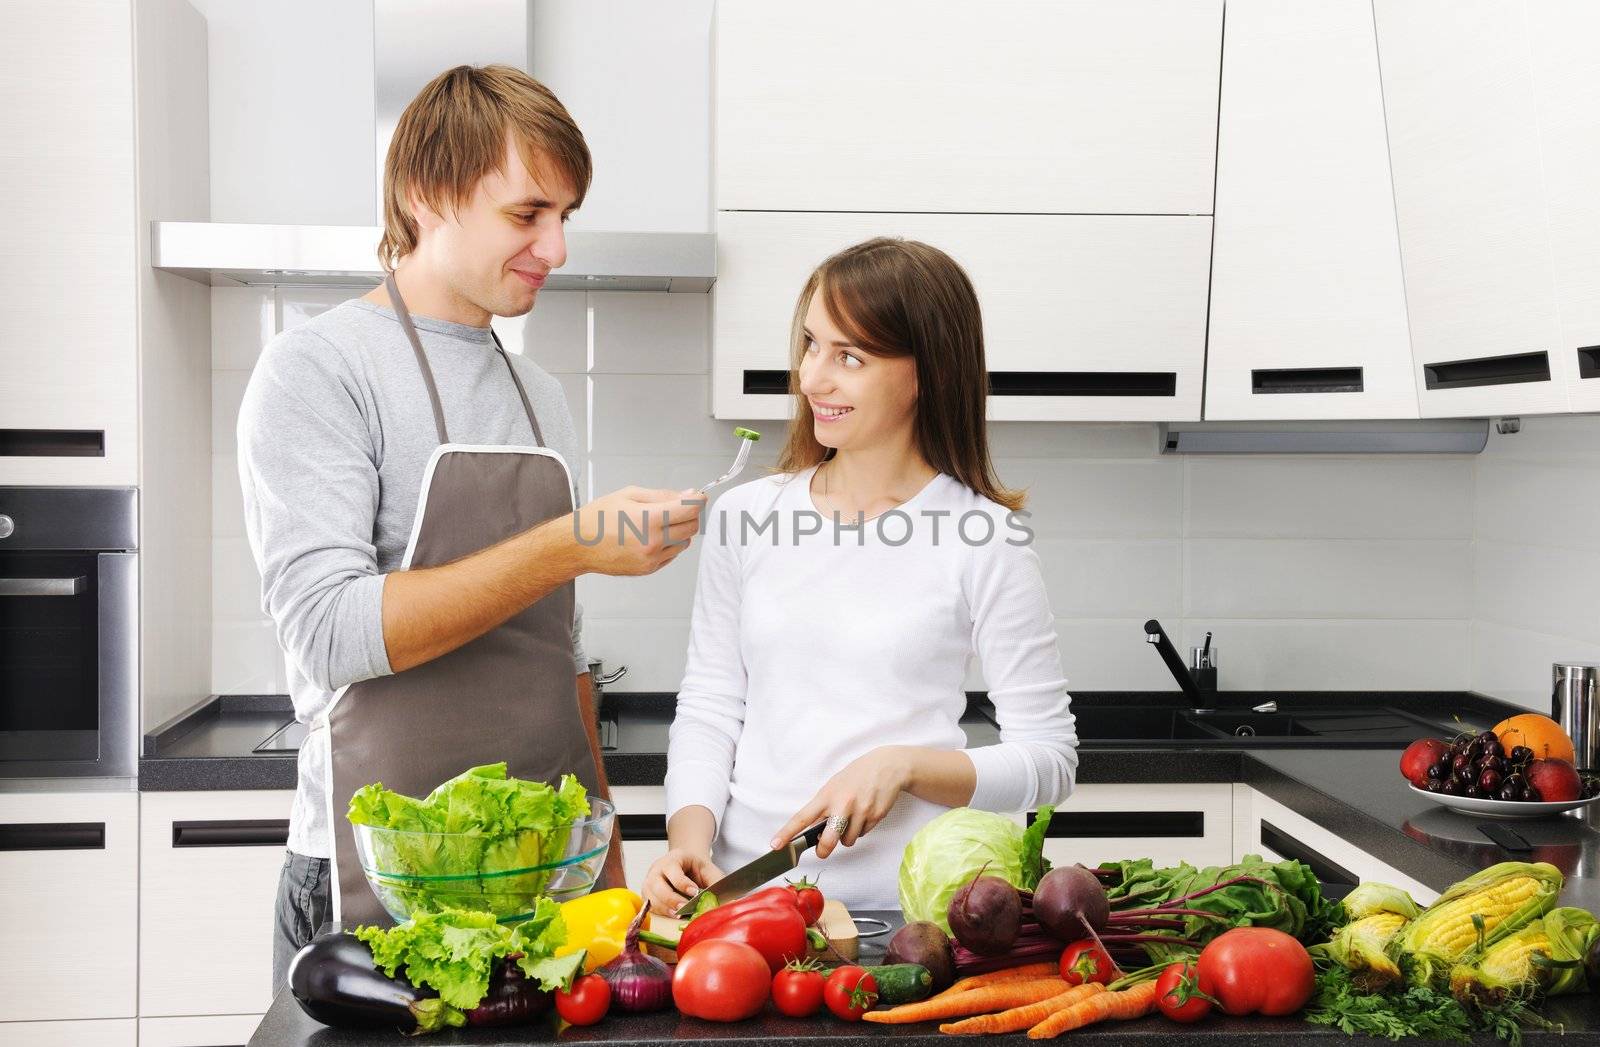 Couple cooking in modern kitchen